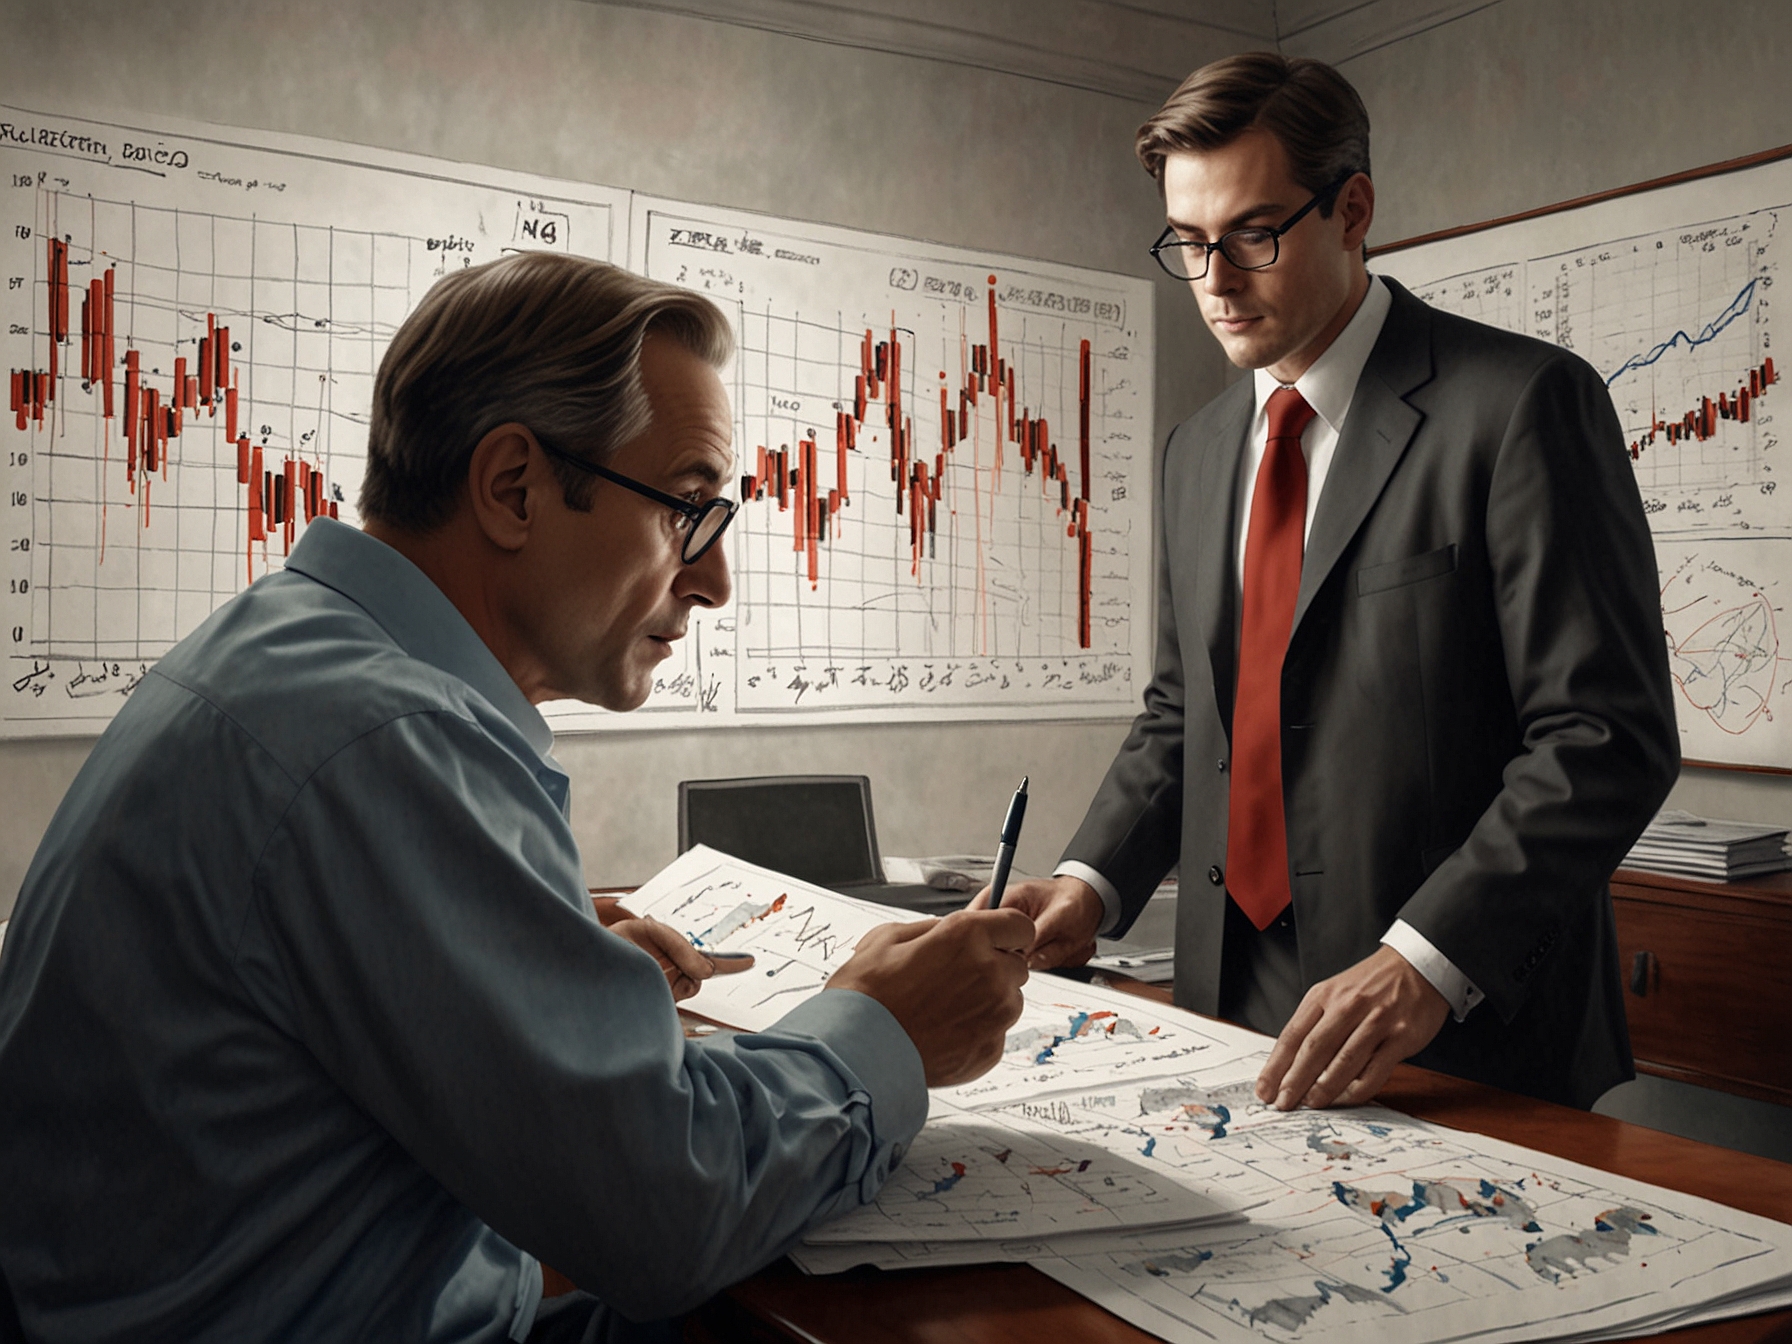 An illustration showing investors examining financial charts and Red Herring Prospectus (RHP) documents before making investment decisions in the Stanley Lifestyles IPO.